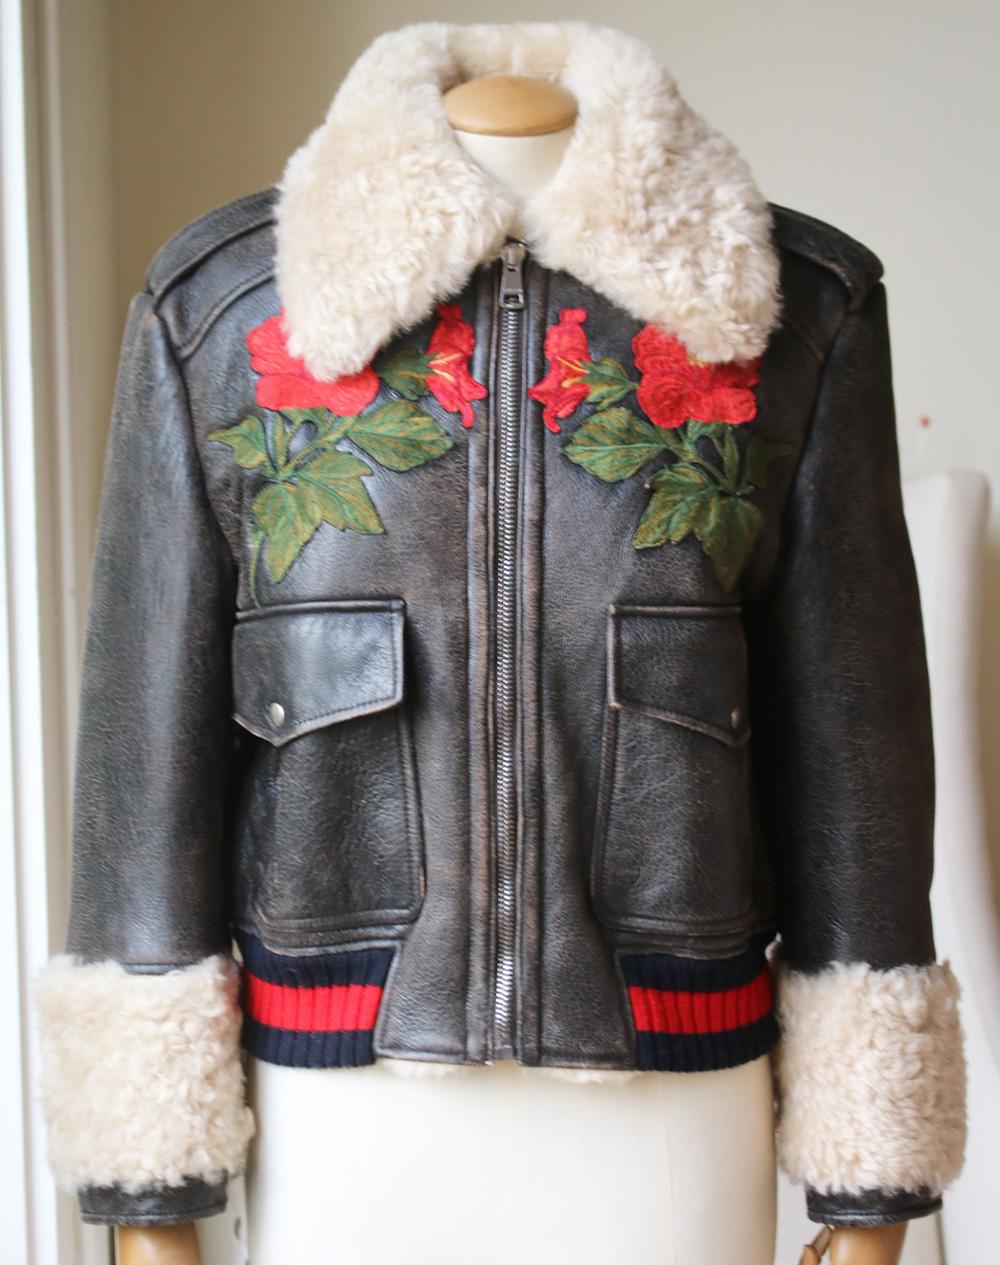 Gucci's shearling lined leather jacket is embroidered with decorative flowers at the chest and a bold LOVED slogan across the shoulders. This cropped Gucci jacket features the label's signature red and blue Web trim finish. Two front flap pockets.